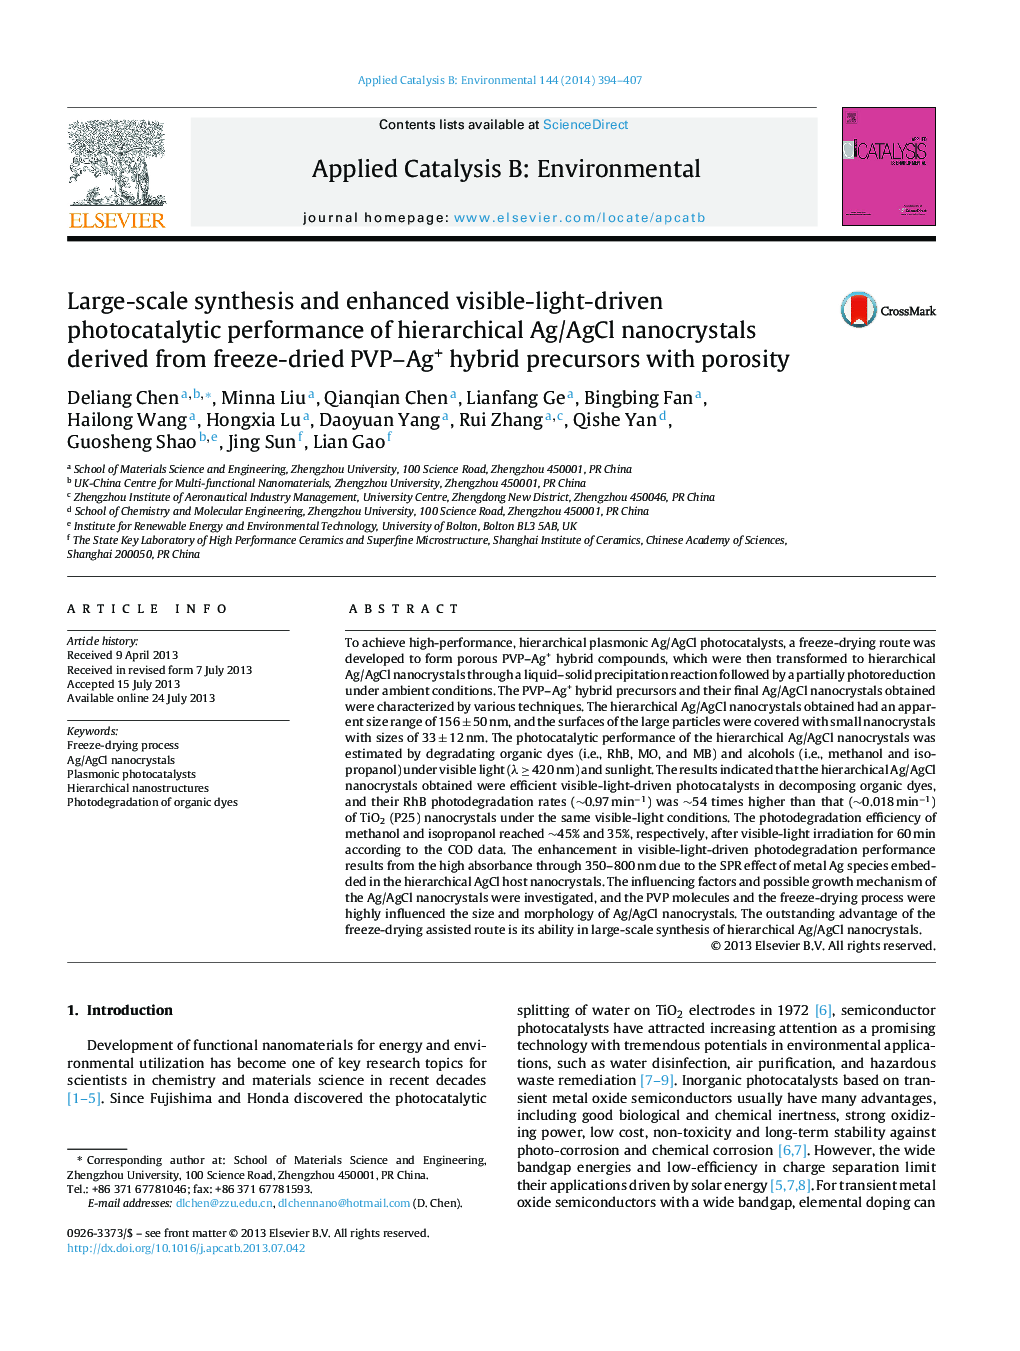 Large-scale synthesis and enhanced visible-light-driven photocatalytic performance of hierarchical Ag/AgCl nanocrystals derived from freeze-dried PVP–Ag+ hybrid precursors with porosity